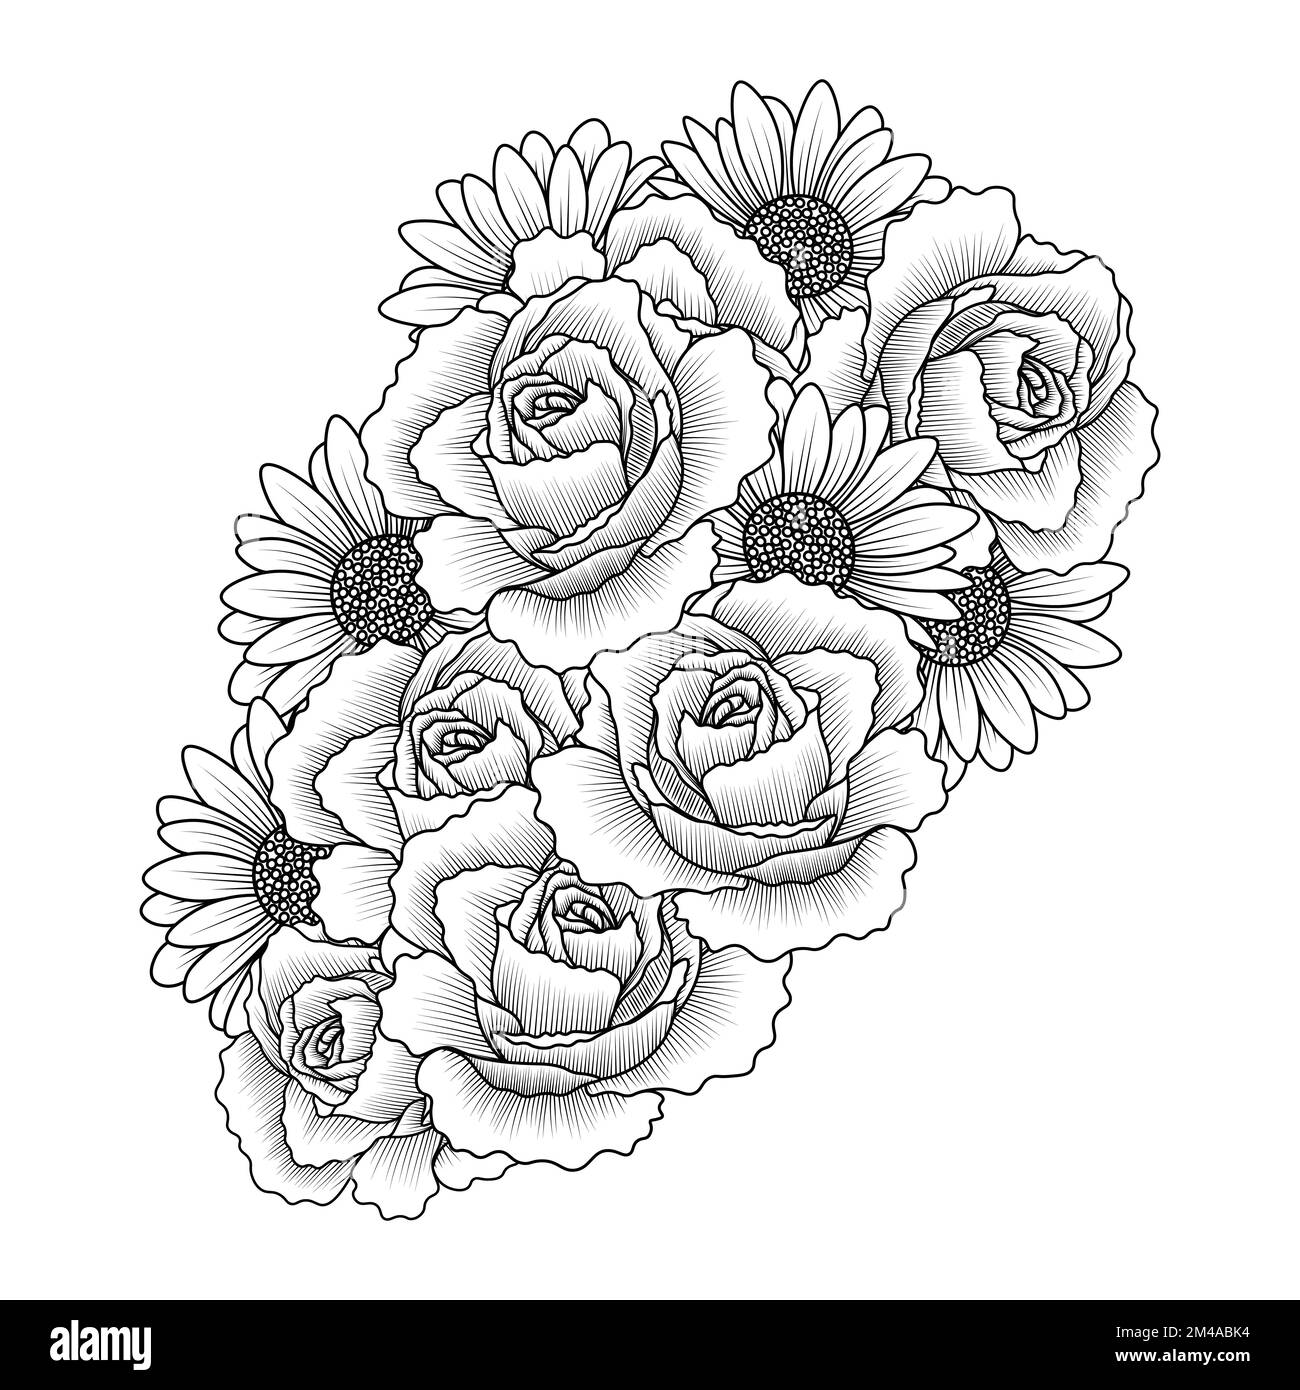 daisy flower and rose flower adult coloring book page design of vector clip art Stock Vector